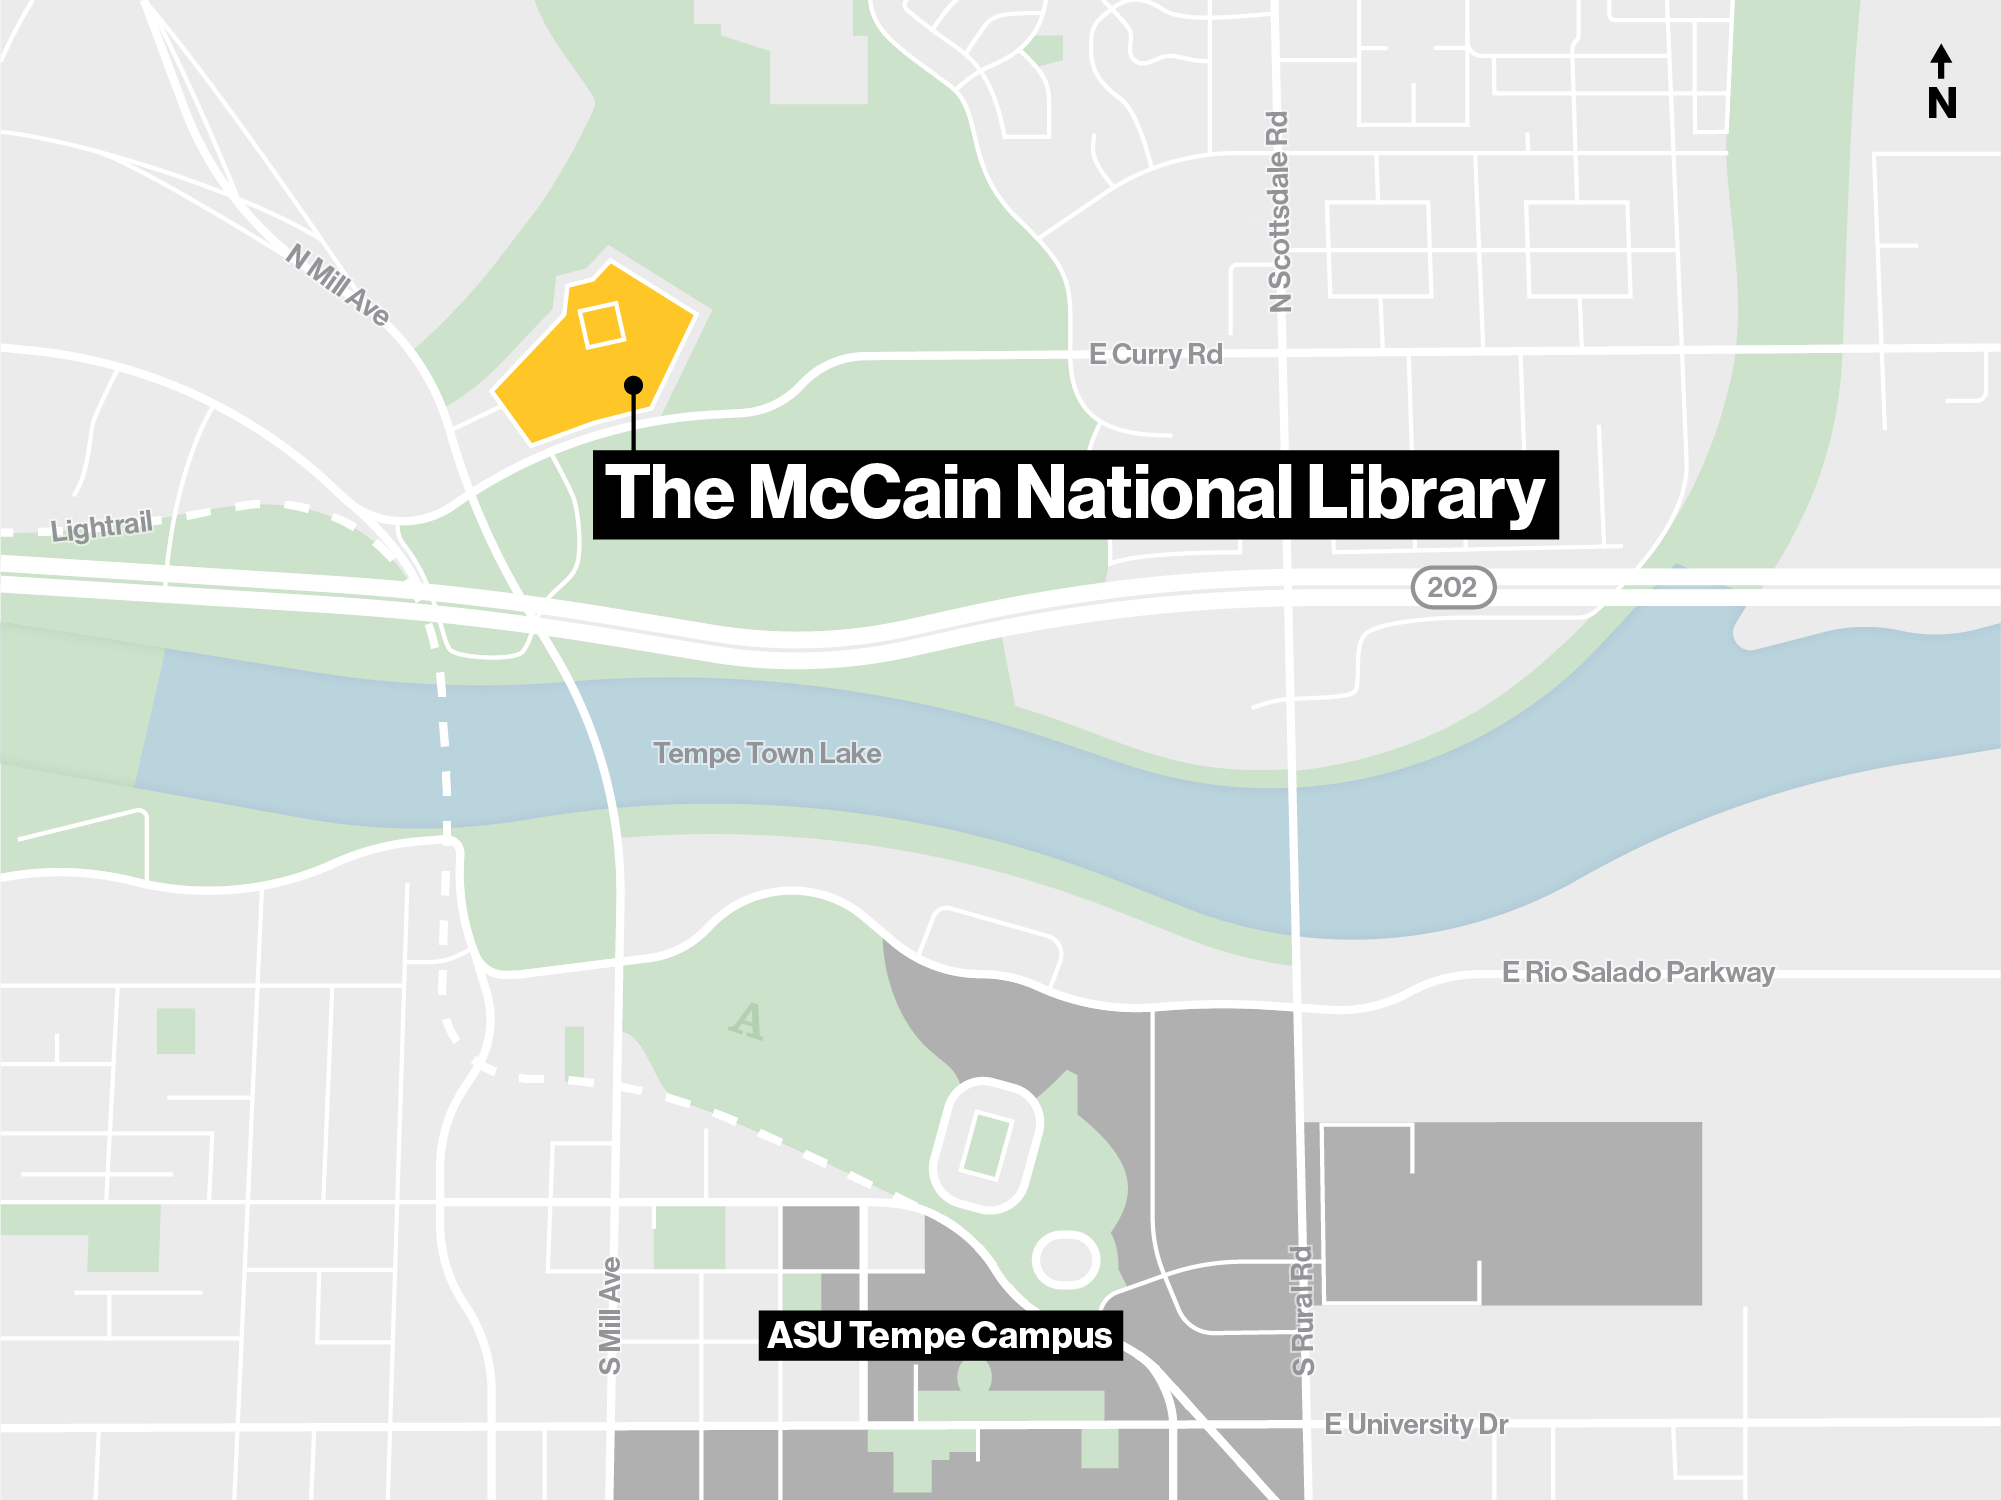 A map showing the location of the McCain National Library in relation to ASU Tempe campus and Tempe Town Lake